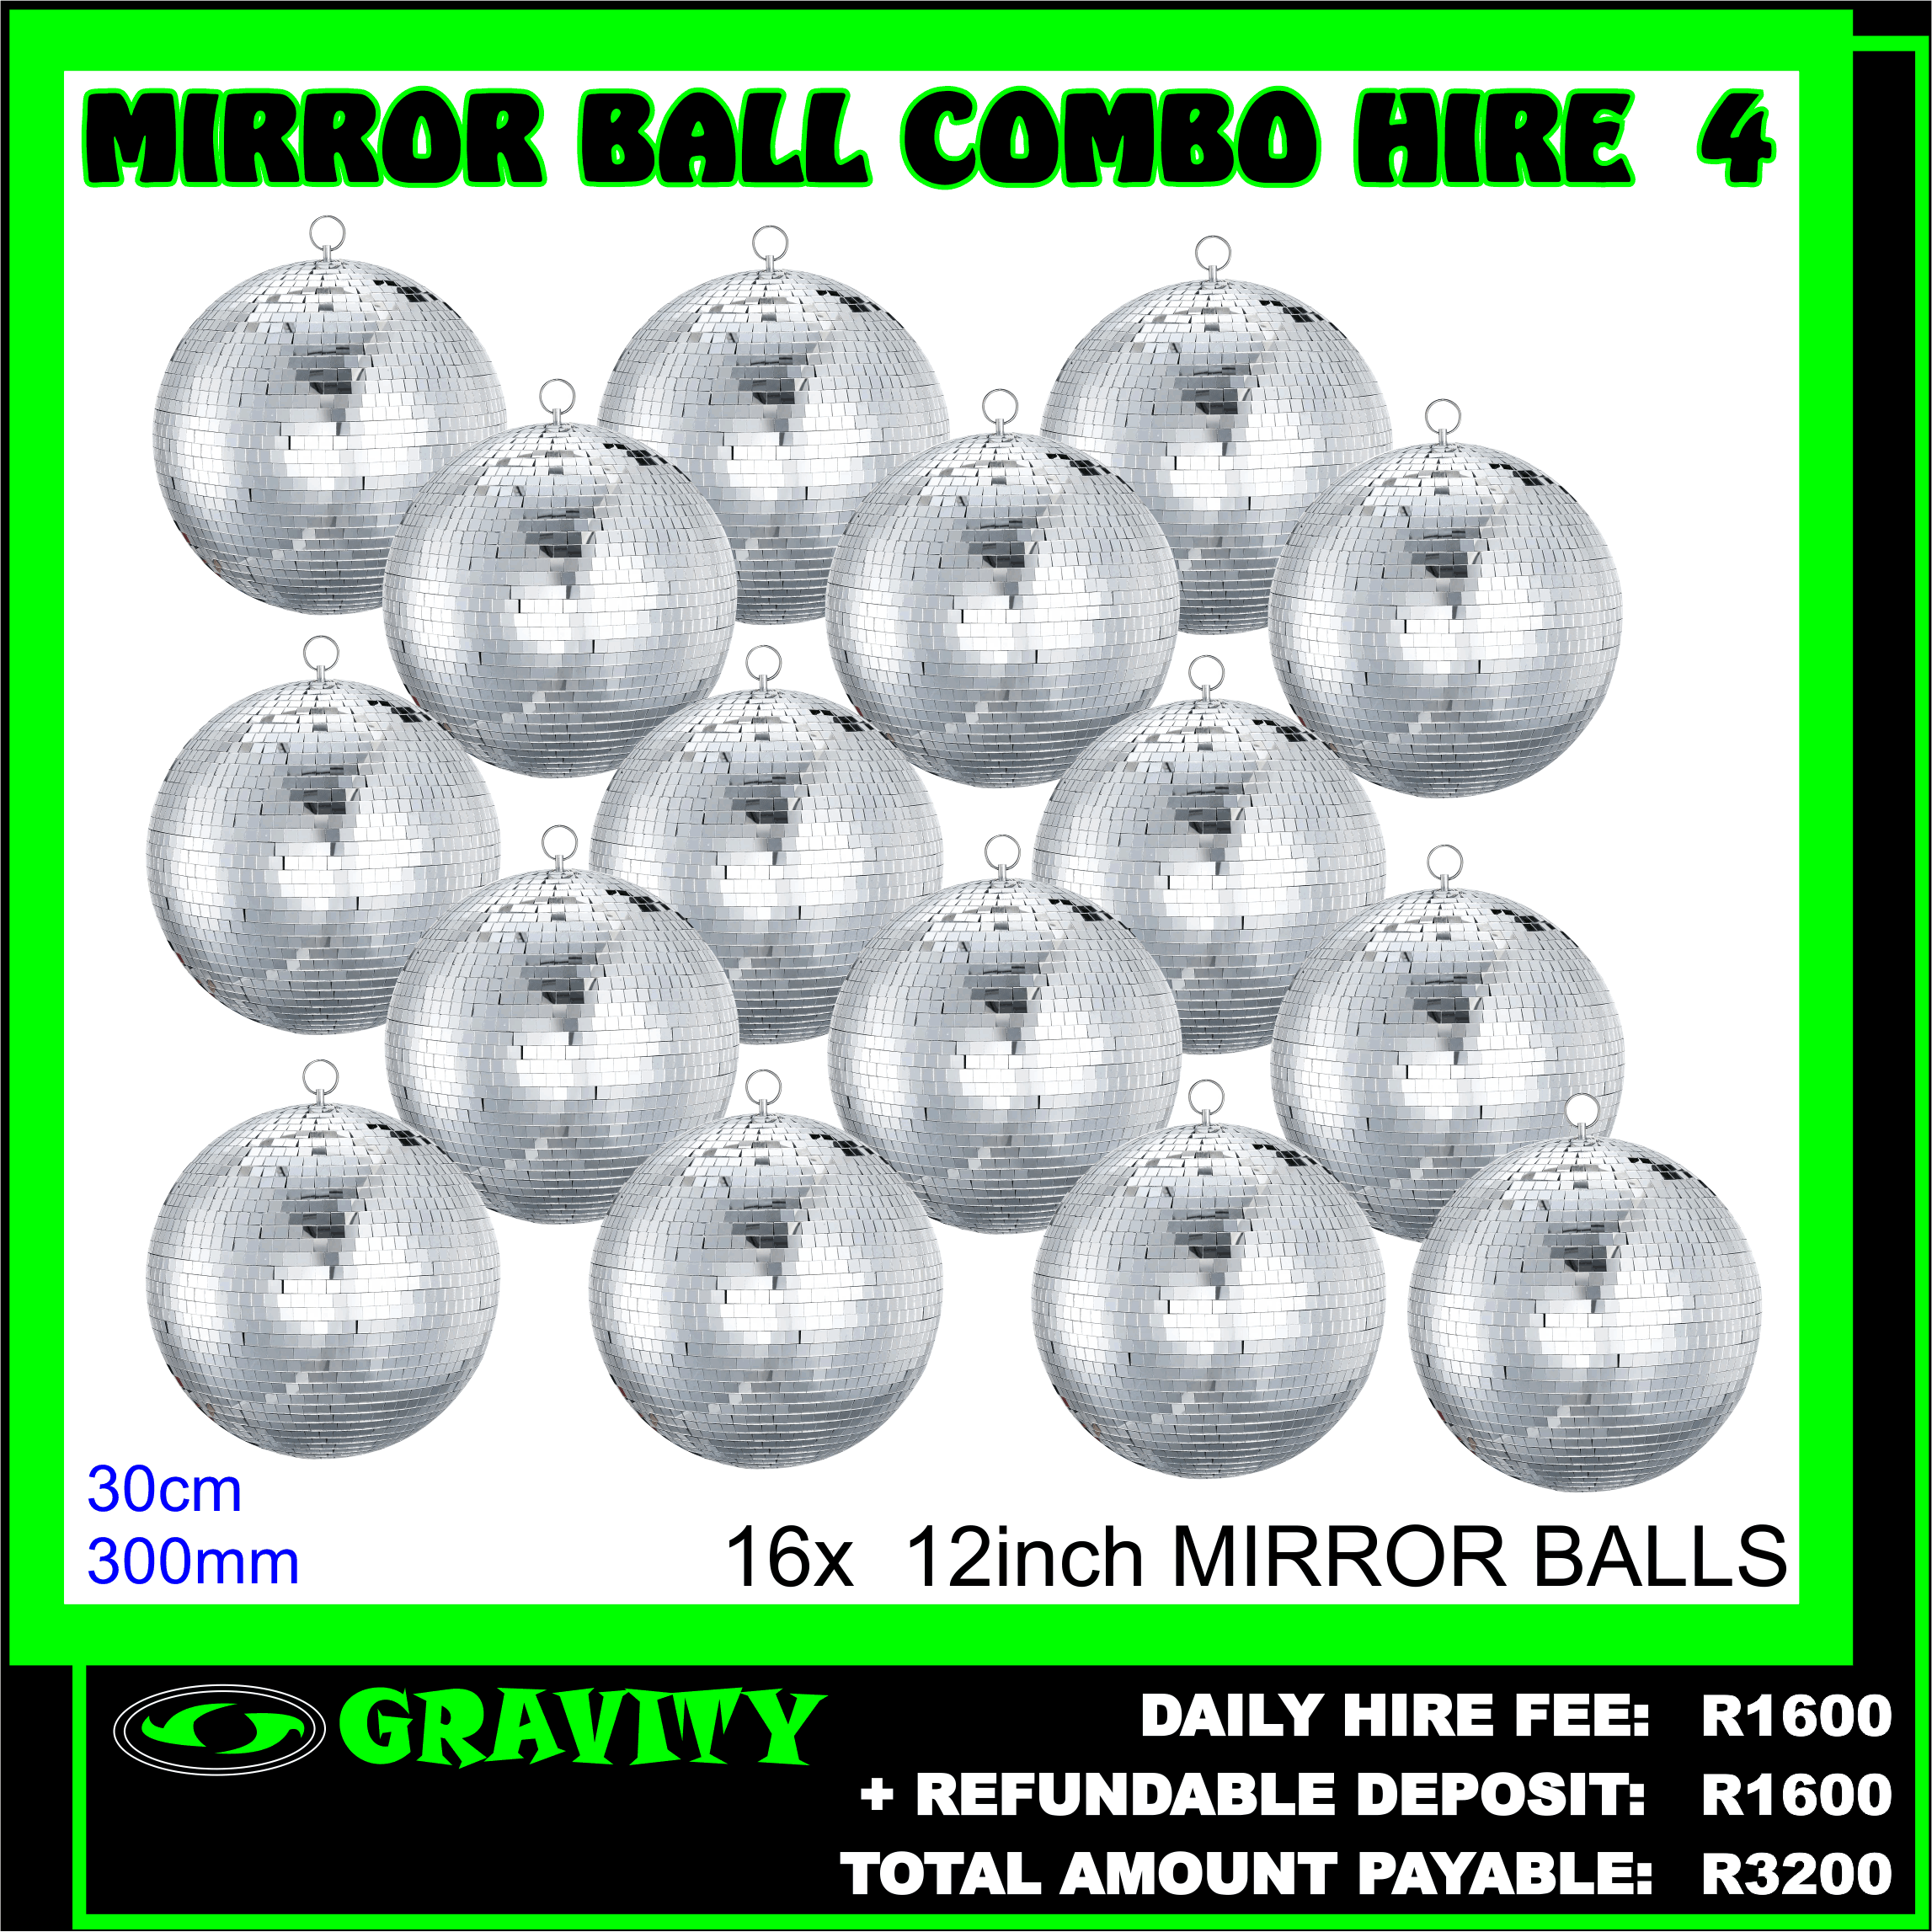  mirror balls - Prodecor Function Decorators - Show Category MIRROR BALL HIRE DURBAN , 80s THEME PARTY MIRROR BALL HIRE DURBAN .  Home Disco Effects Hire For Party or Event - Joy Jukes  Mirror Ball Hire | Mirror Ball, Motor, Pin Spot and Stand ...https://cal-x.co.za › product › mirror-ball-hire Mirror ball hire from CAL-X Rentals. The mirror ball is a classic lighting accessory. Our rental kit includes everything you need. It comes with a 30cm mirror ... 